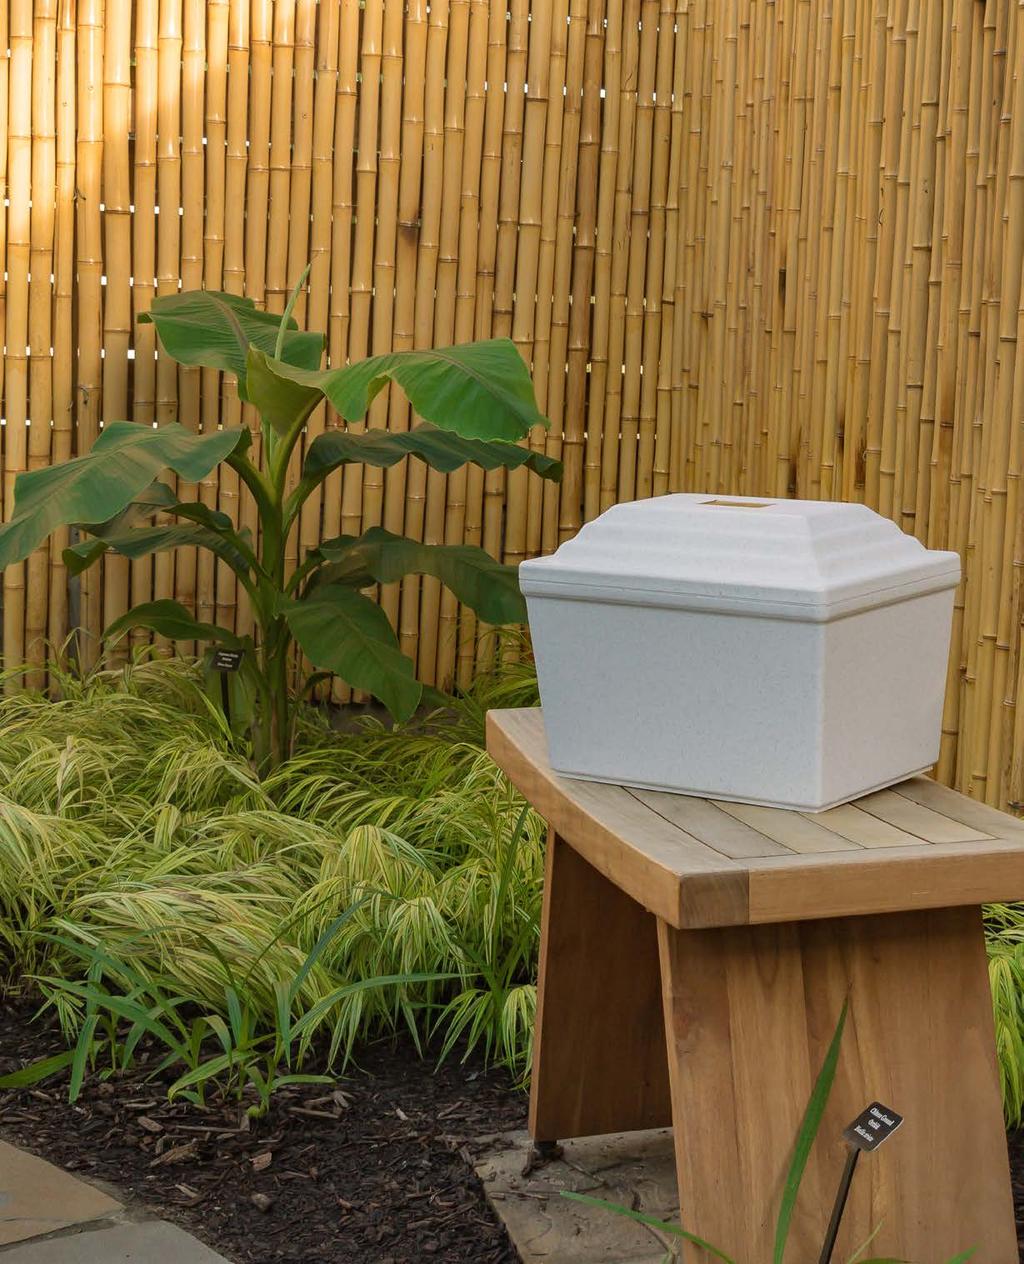 Urn vaults Vaults offer protective containment for urns to meet cemetery requirements for earth burial.